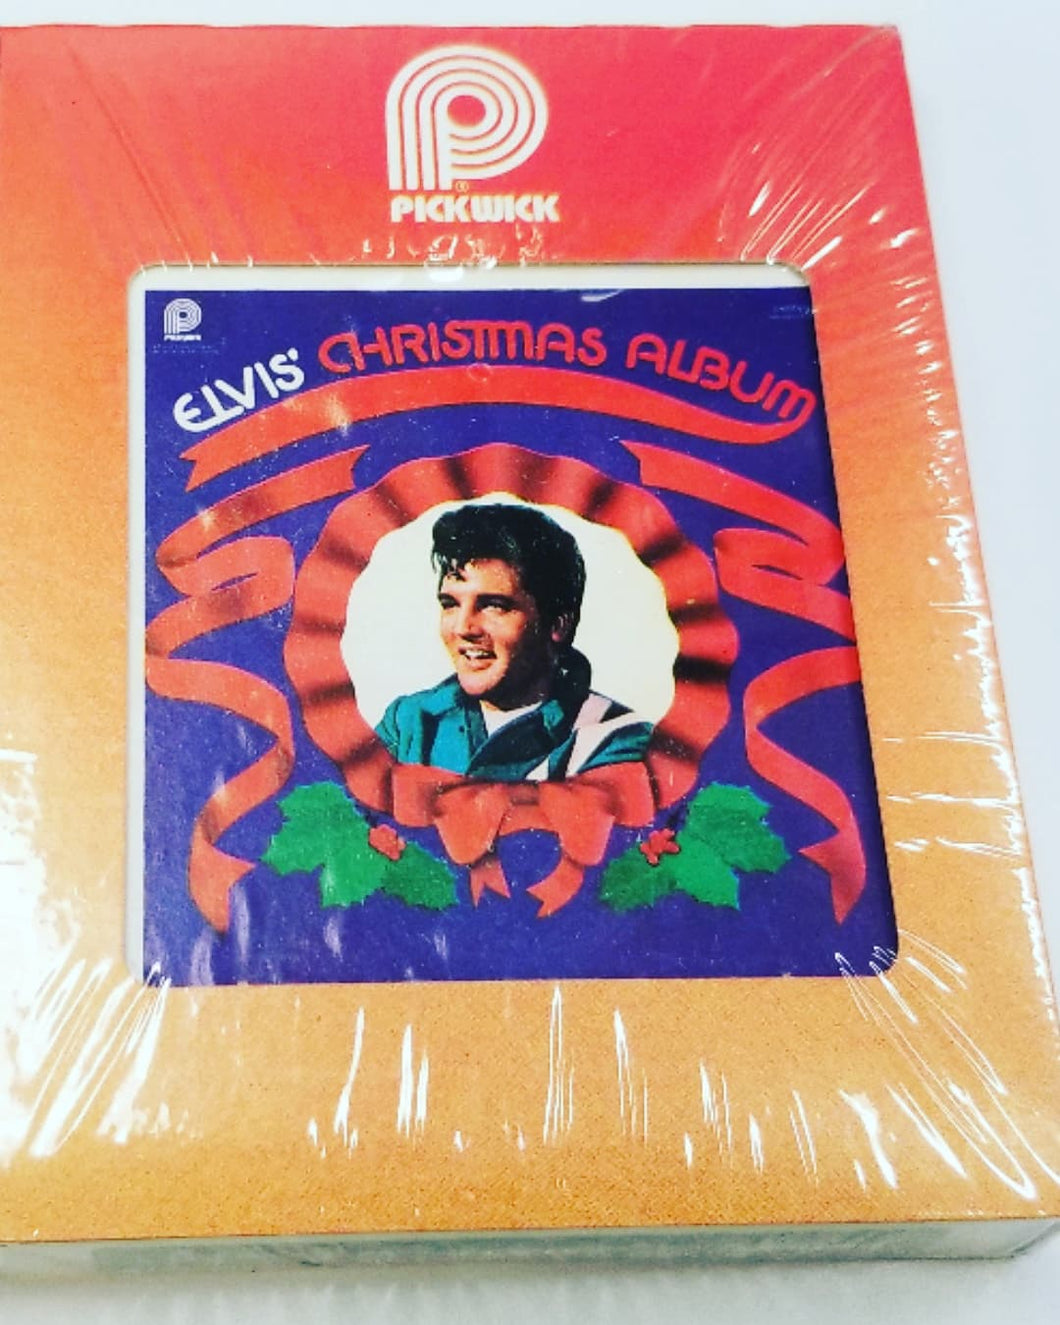 Original Elvis Christmas 8-track, restored with new pads and splicers